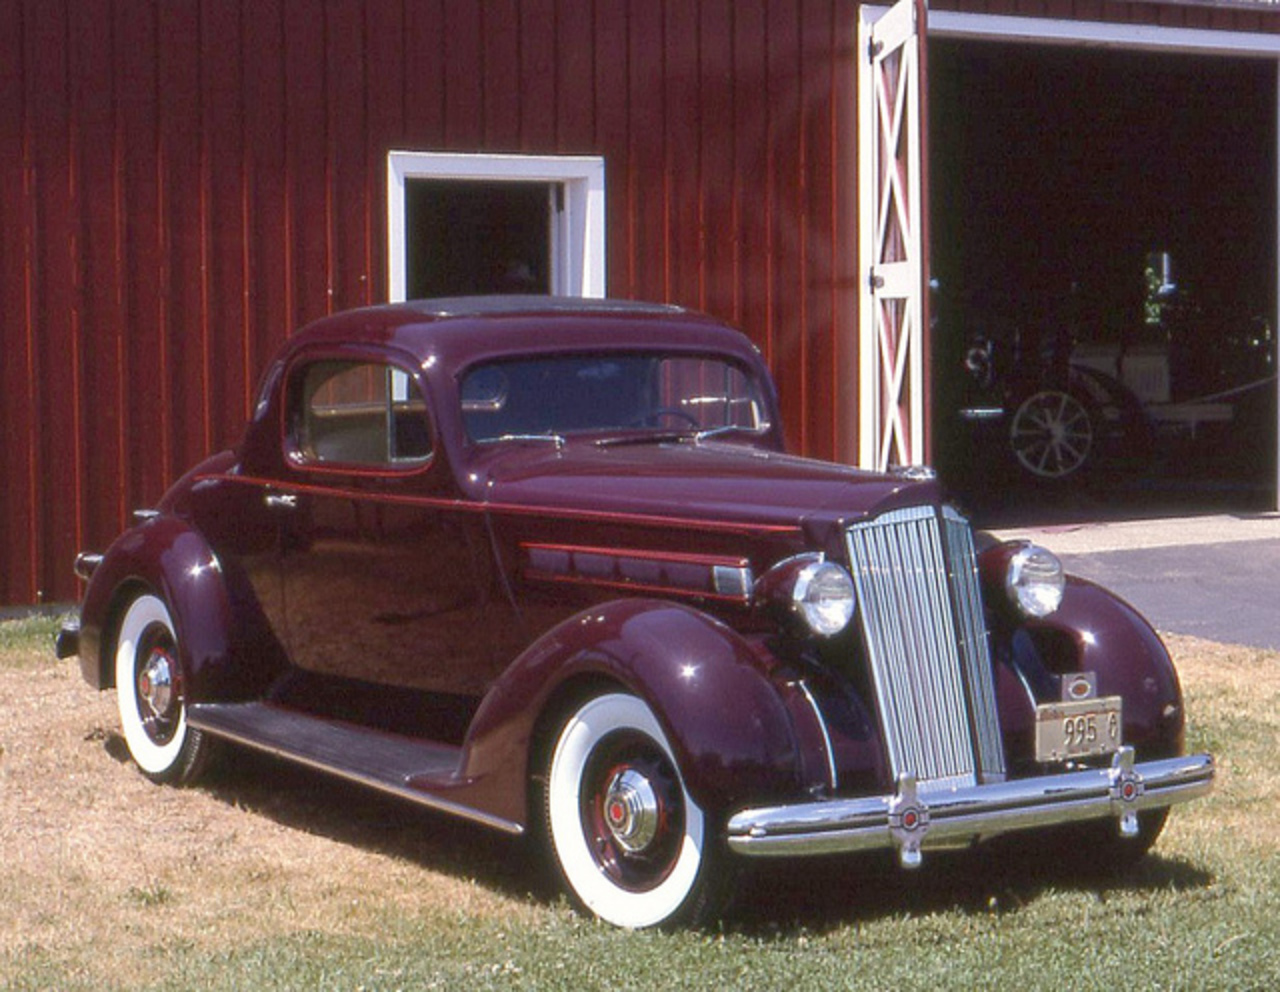 1936 Packard 120 coupe | Flickr - Photo Sharing!